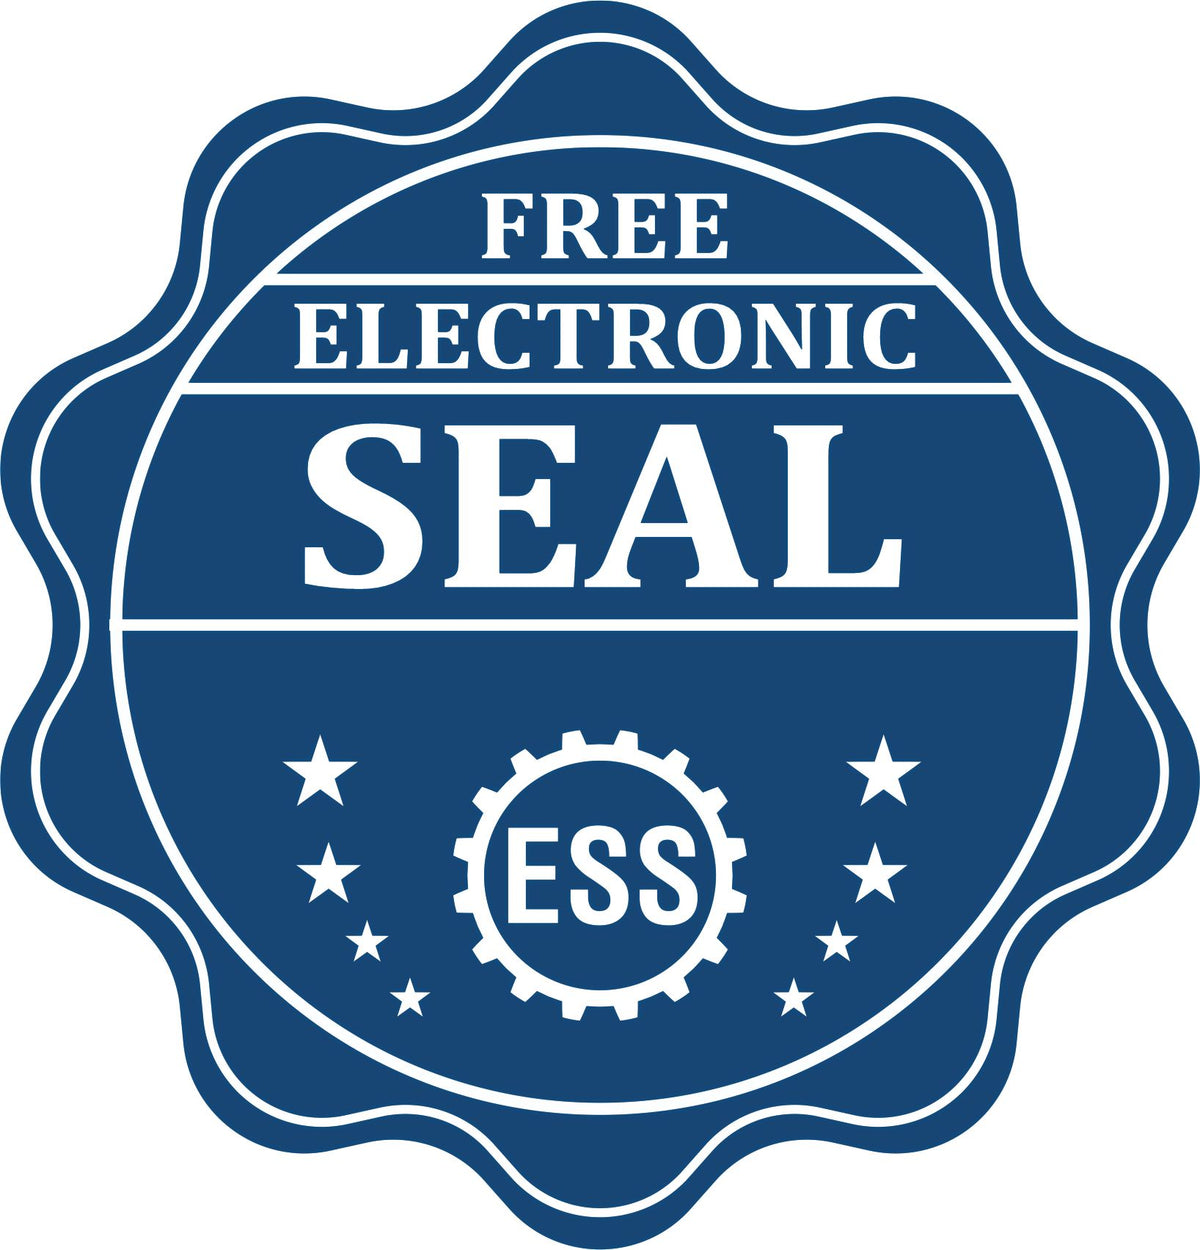 A badge showing a free electronic seal for the Soft New Jersey Professional Engineer Seal with stars and the ESS gear on the emblem.